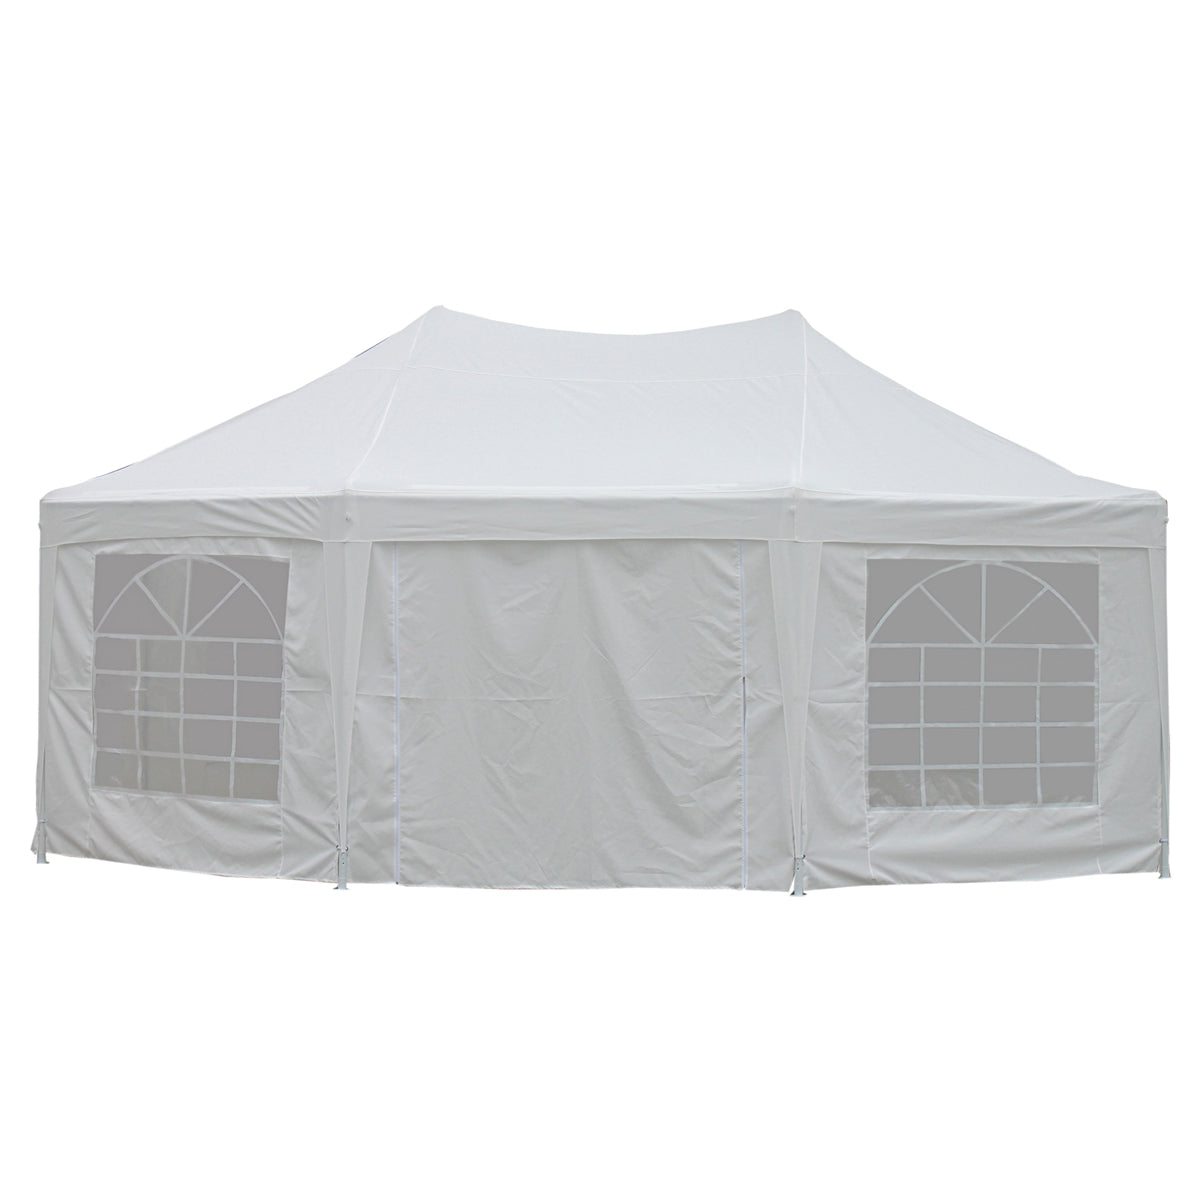 Aleko Heavy Duty Octagonal Outdoor Canopy Event Tent with Windows - 20 X 14 FT - PWT22X16-AP